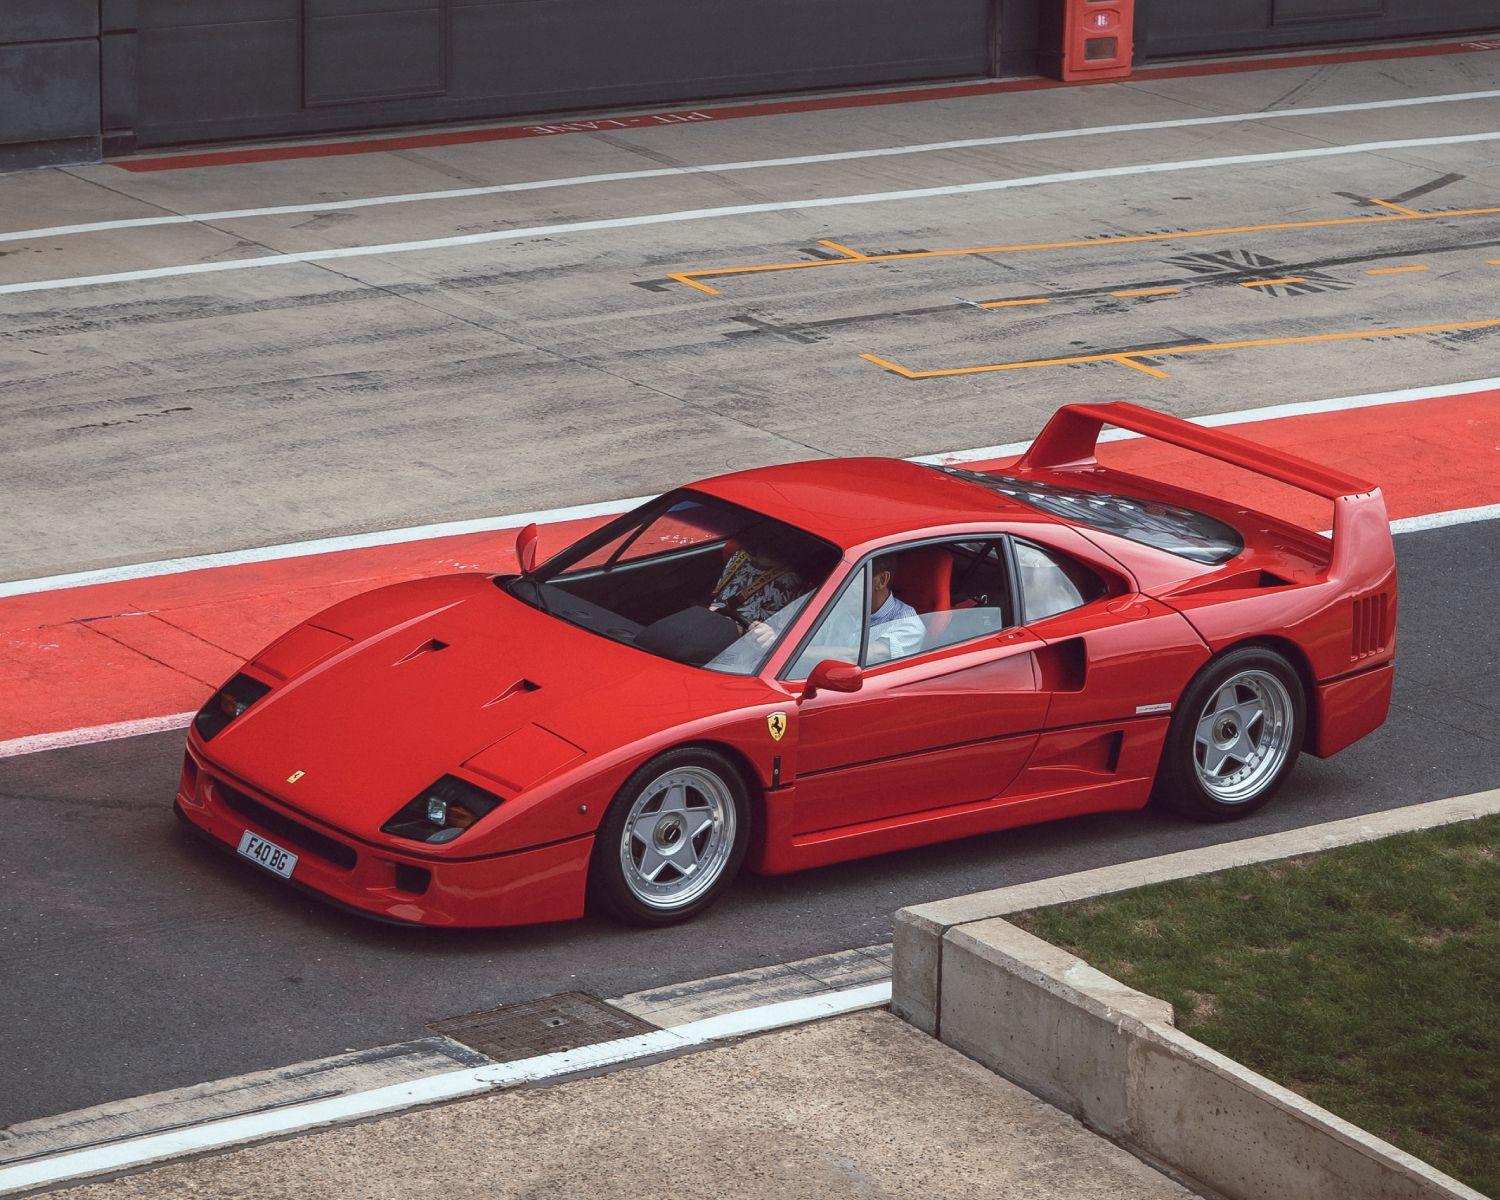 The Ferrari F40 now sells for over $1 million, and reaches speeds of over 200 mph. 